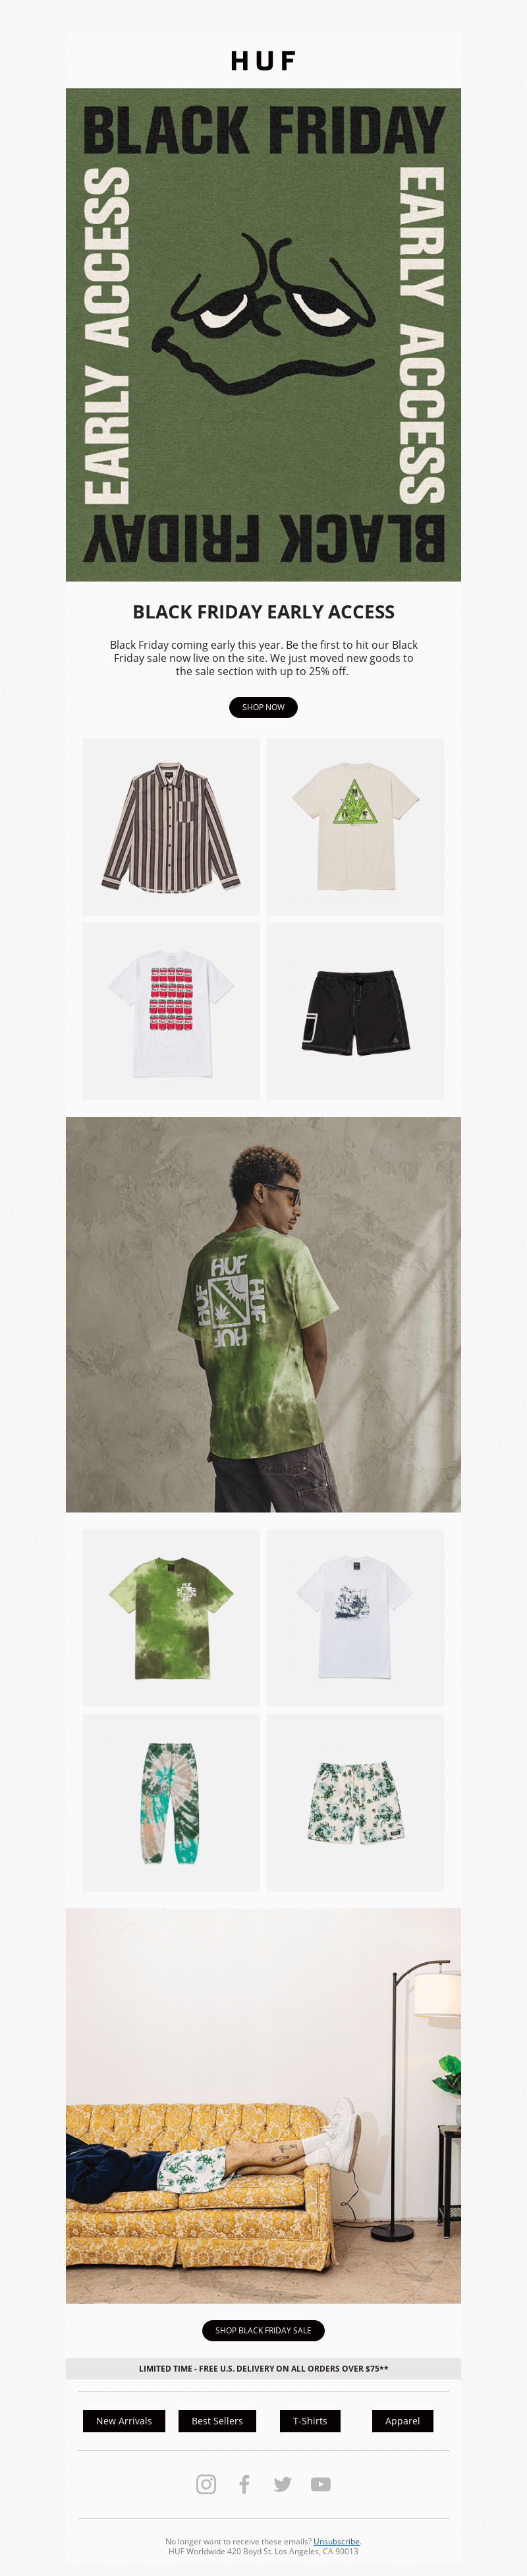 Black Friday email from HUF with a warm green banner with a content face and product recommendations below it